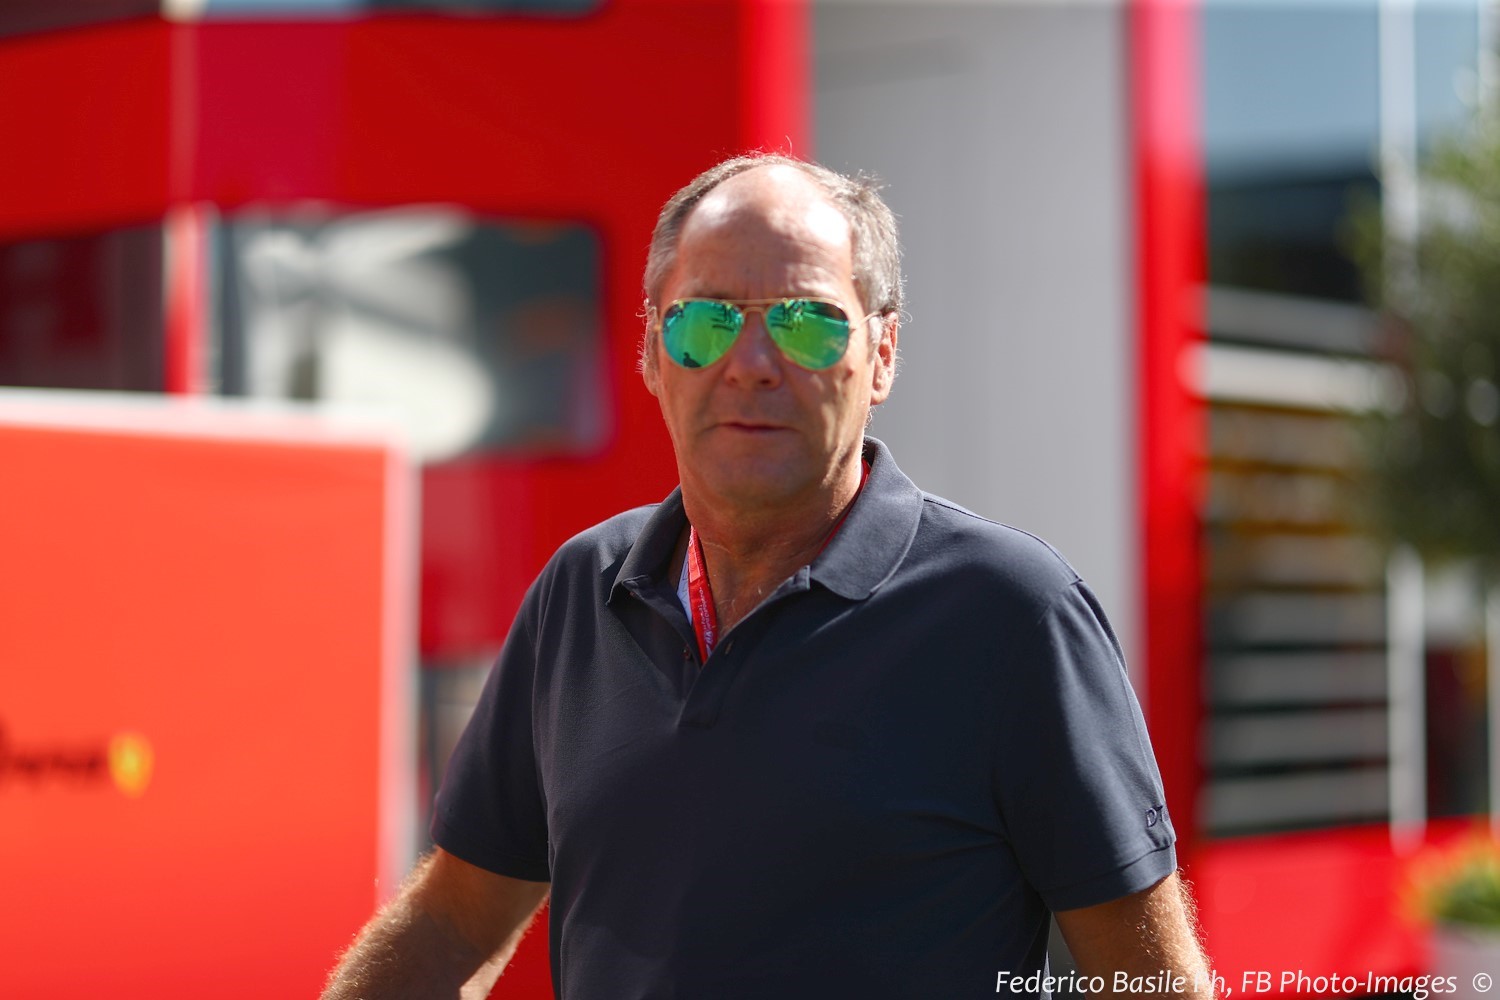 In a rare moment, Gerhard Berger is 100% correct